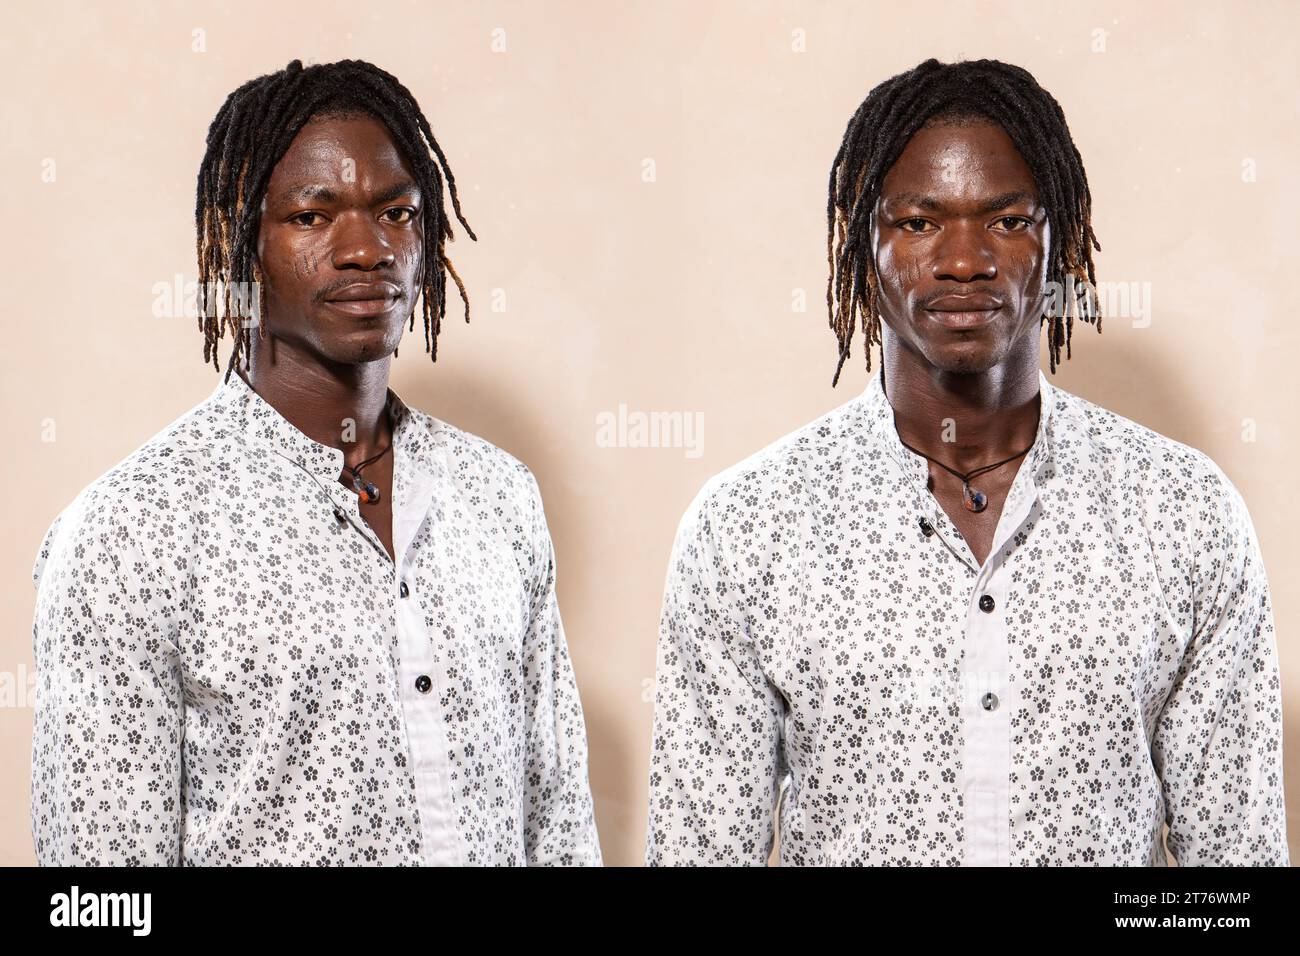 Identical twins. African homozygous twin brothers concept. Subject seen from different angles. Model with dreadlocks hair Stock Photo